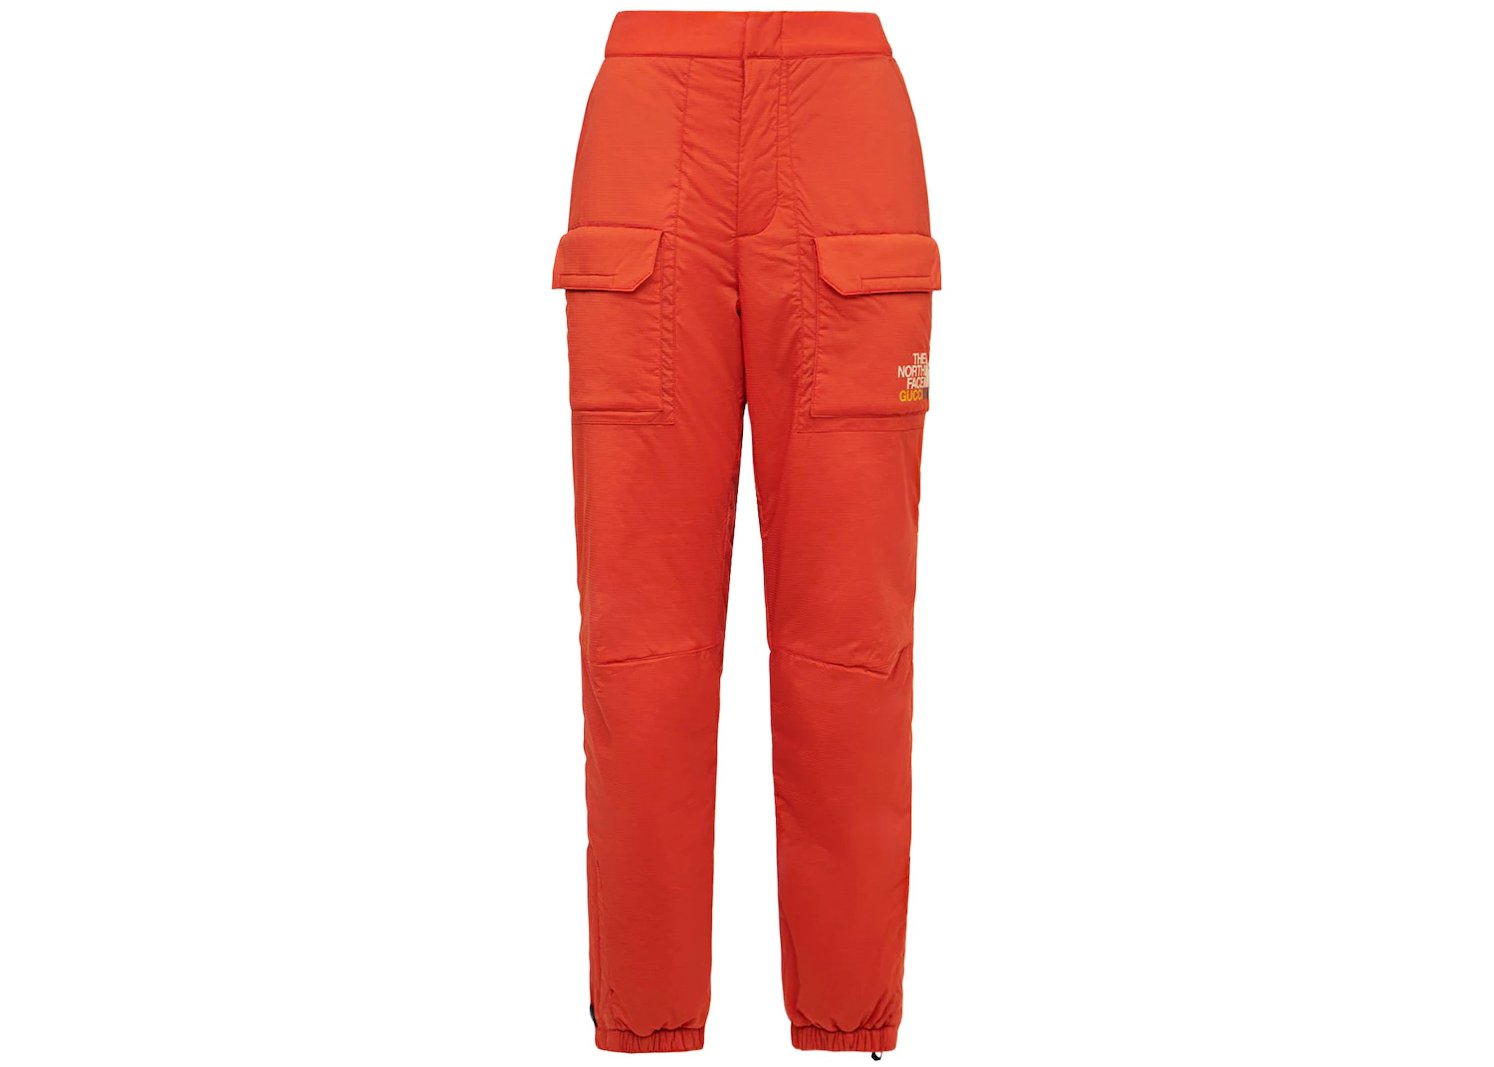 streetwear Gucci x The North Face Pant Orange